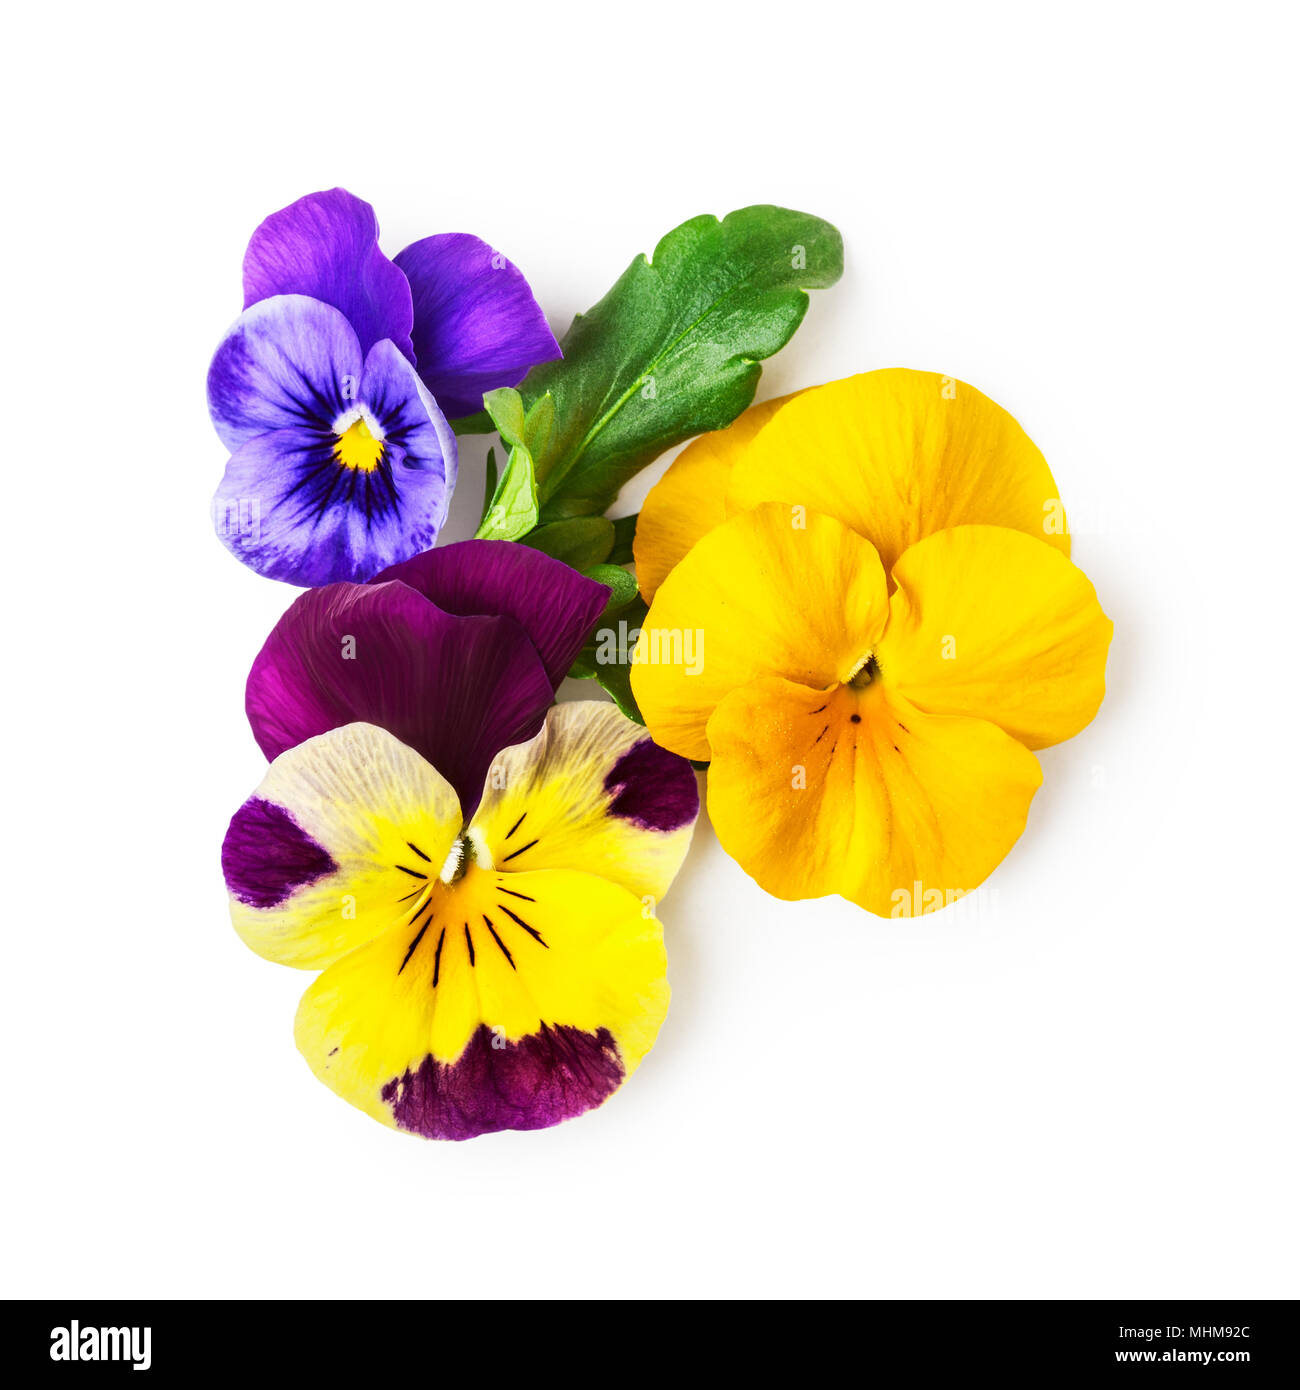 Pansy flowers or spring garden viola tricolor on white background clipping path included. Flower arrangement and floral design. Top view, flat lay Stock Photo